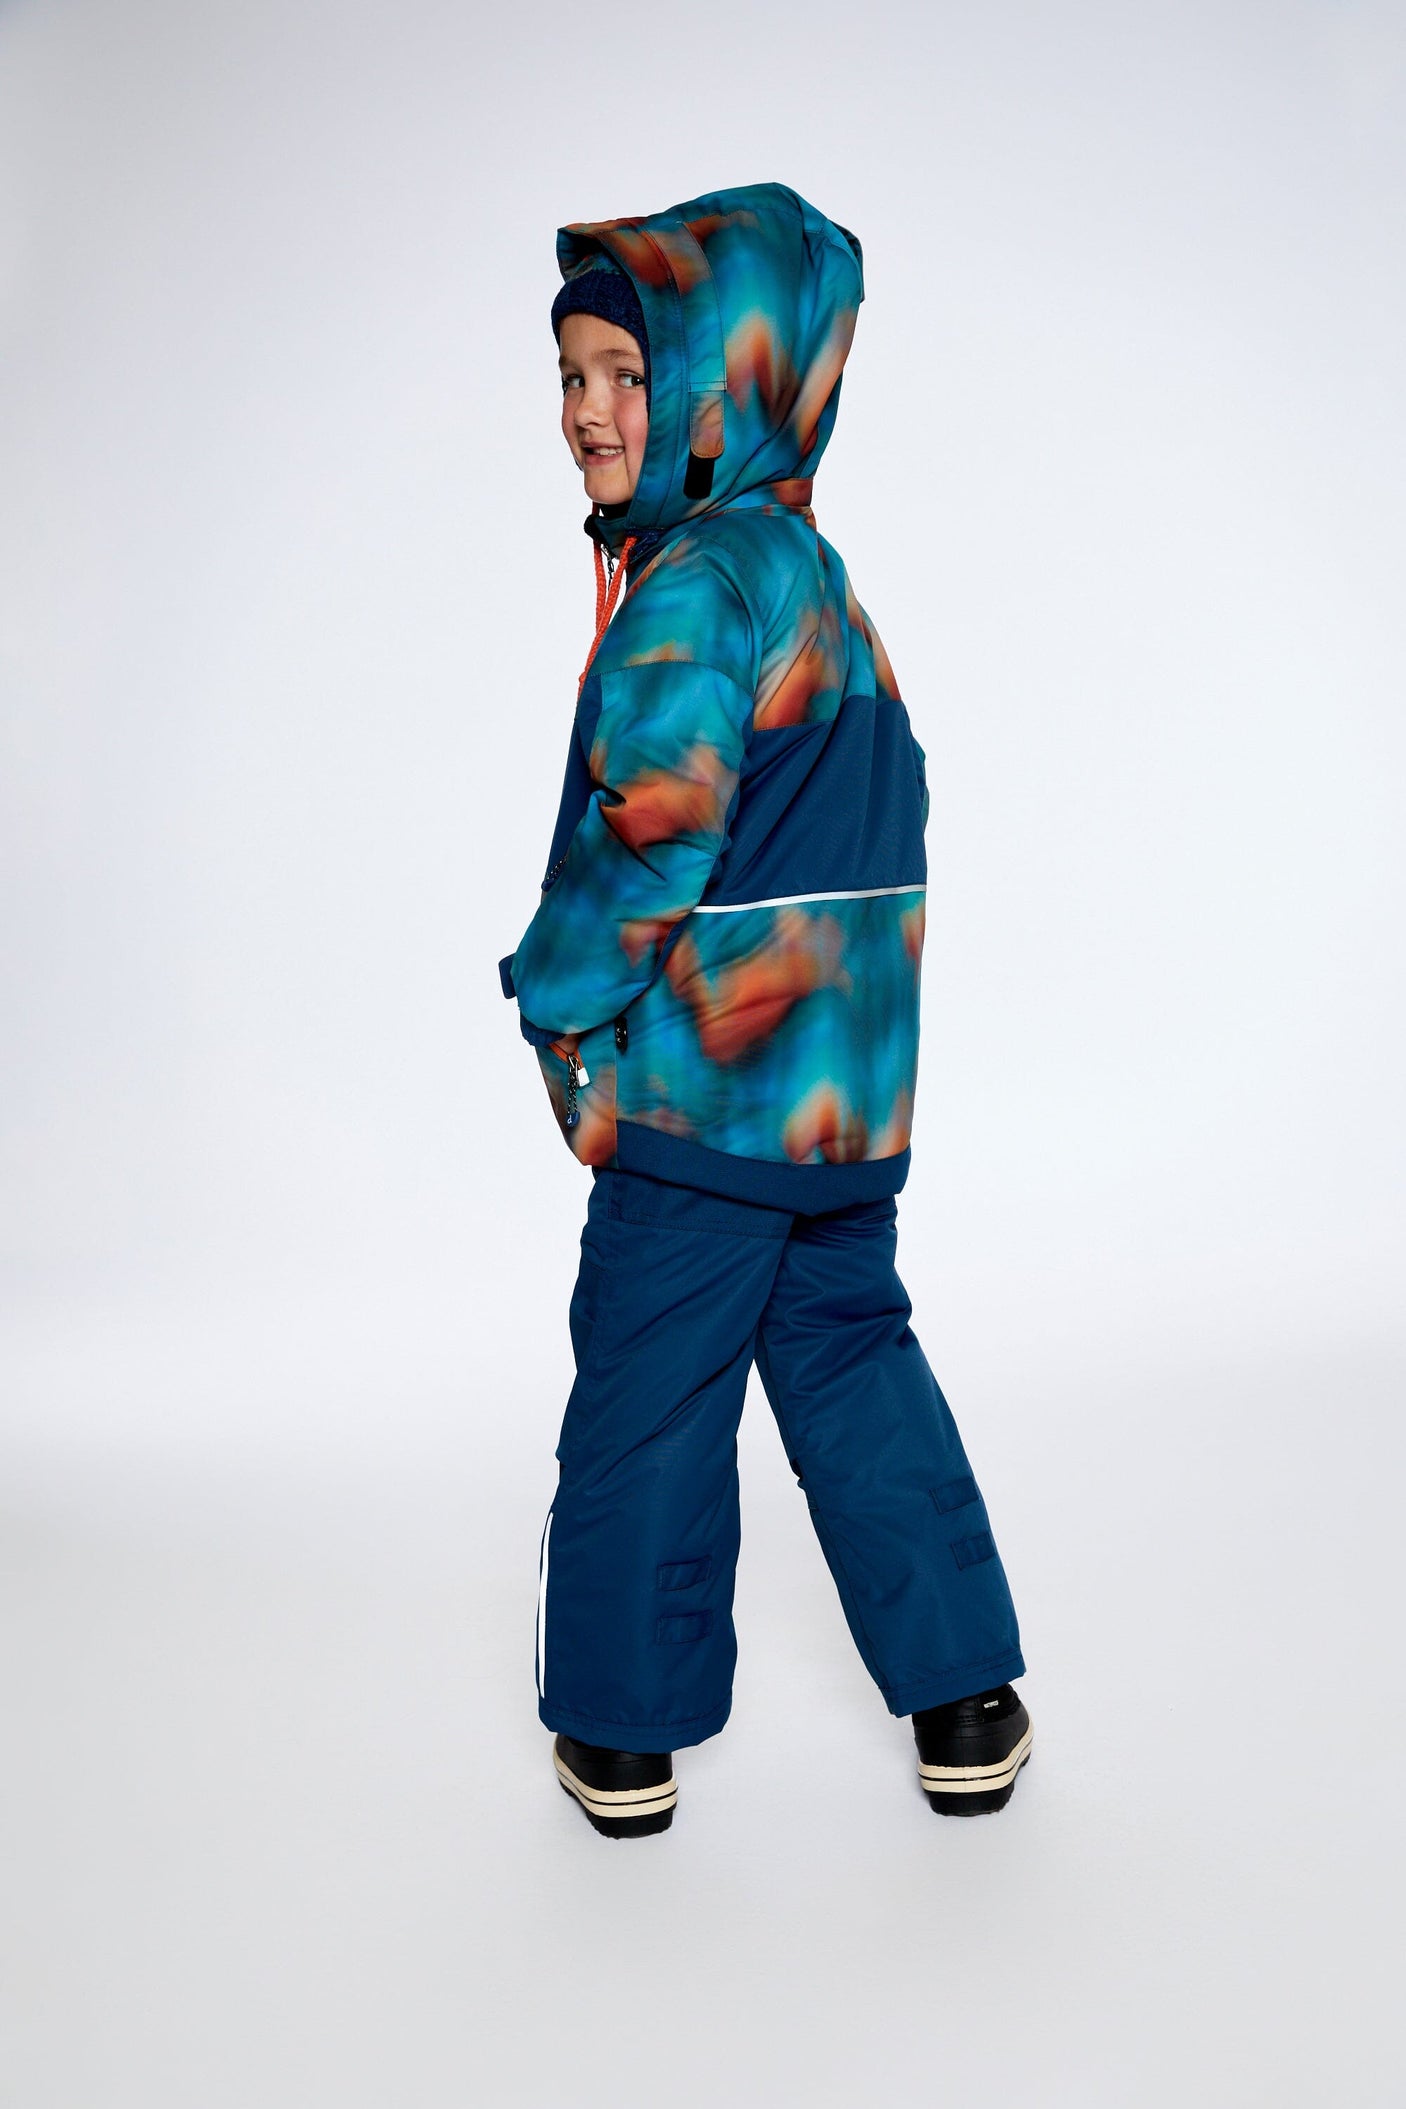 Two Piece Snowsuit In Deep Teal With Water Colour Gradient-1